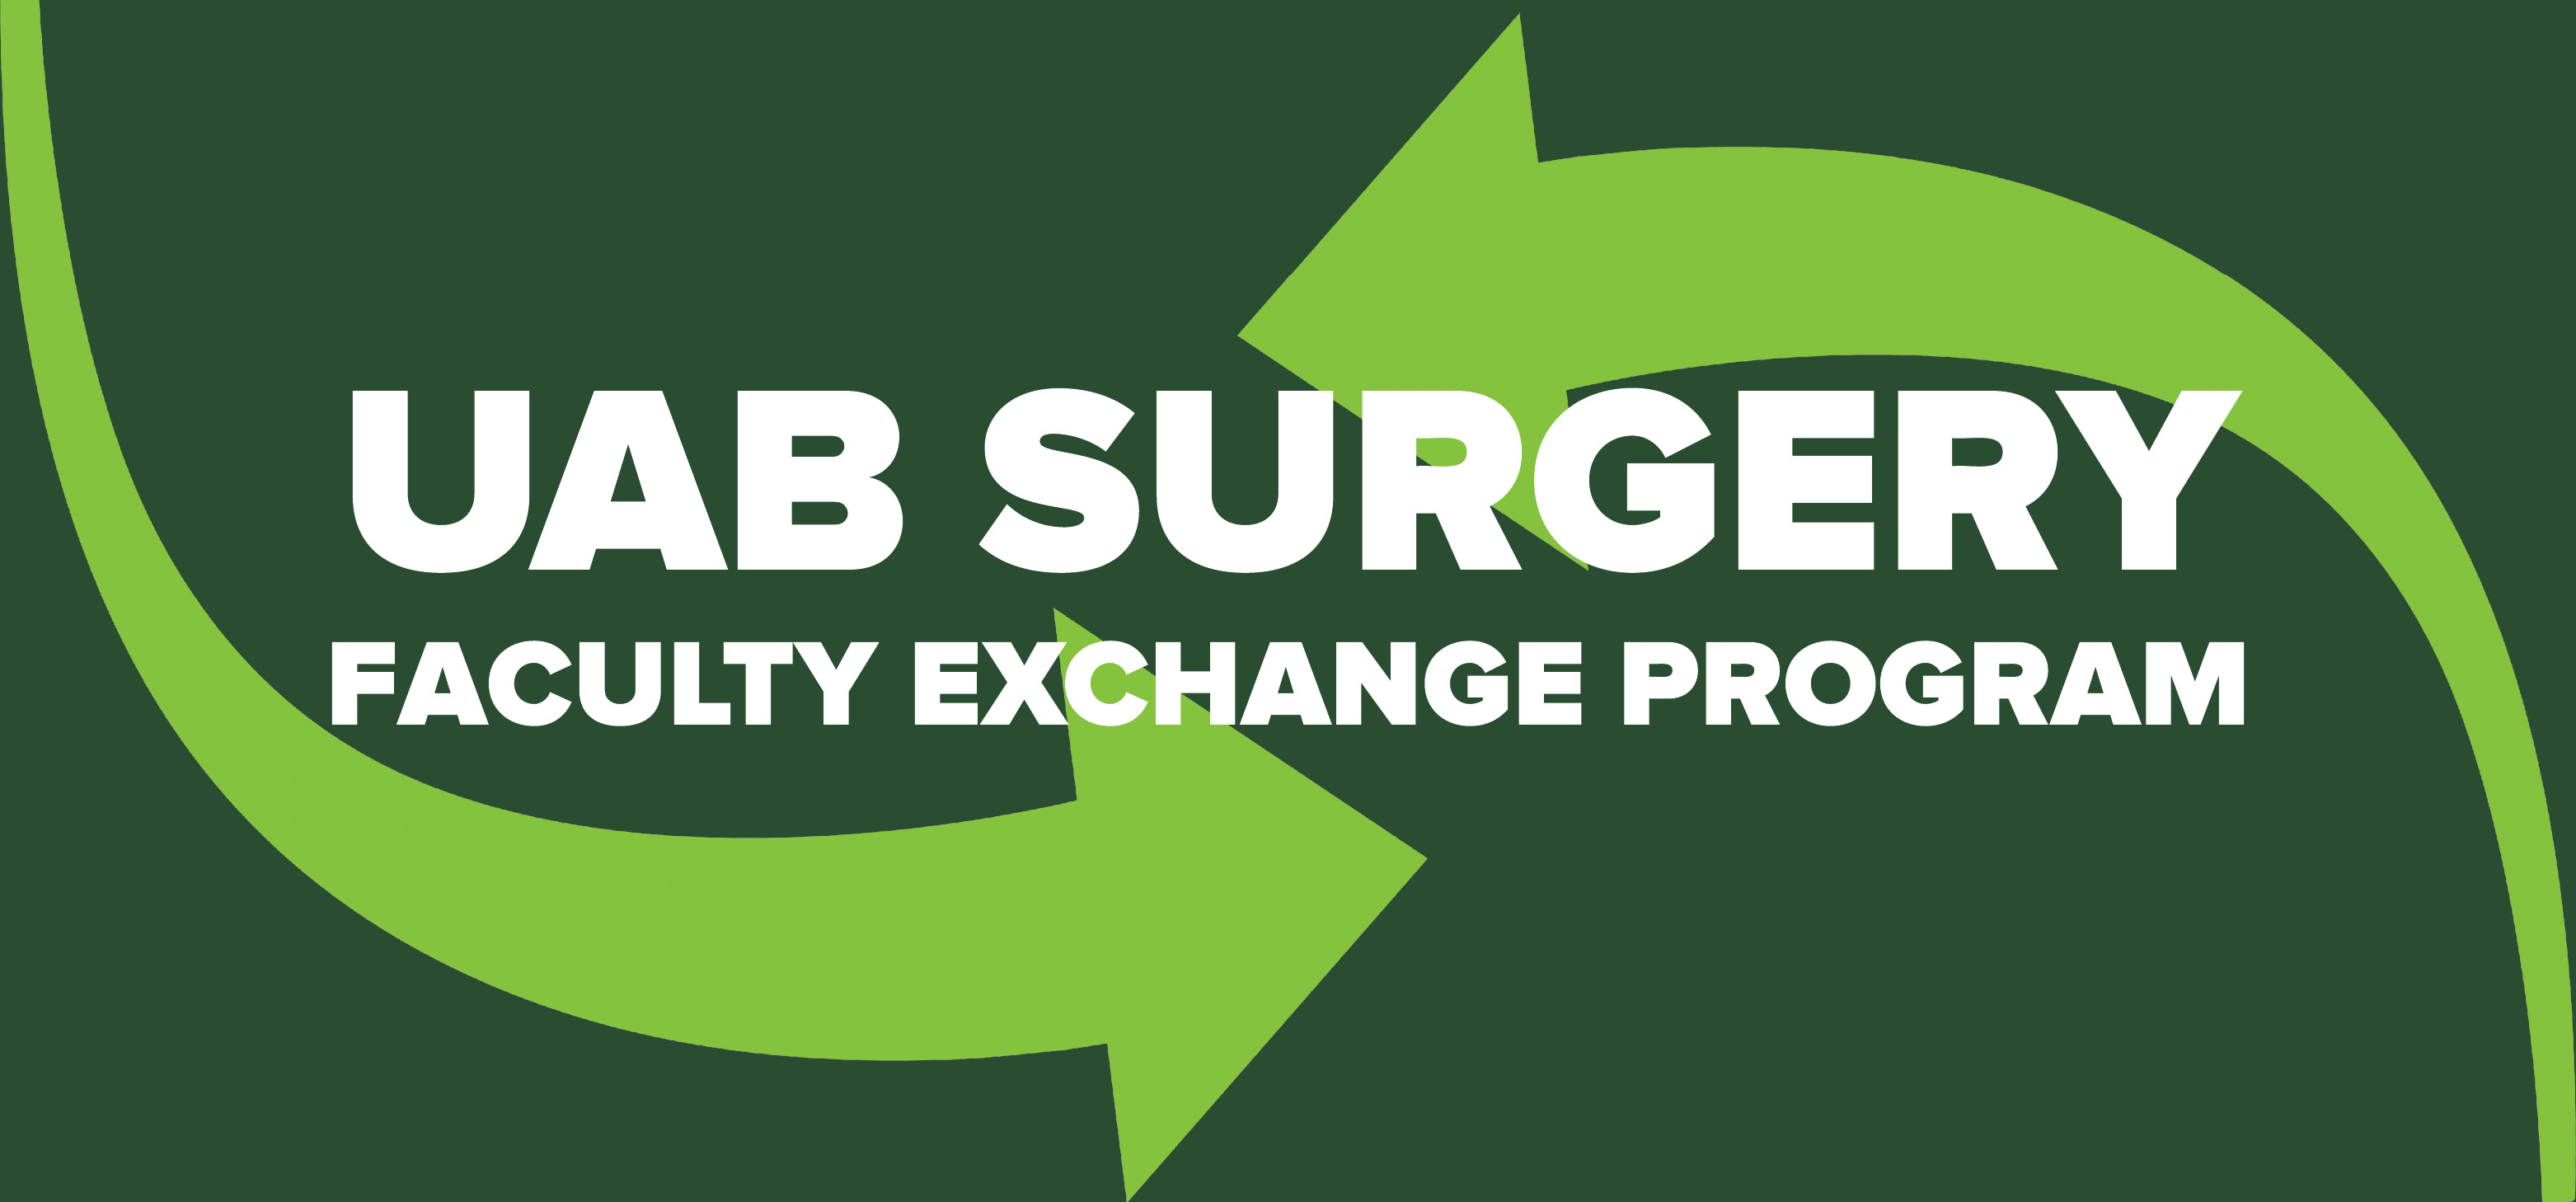 Surgery Faculty Exchange